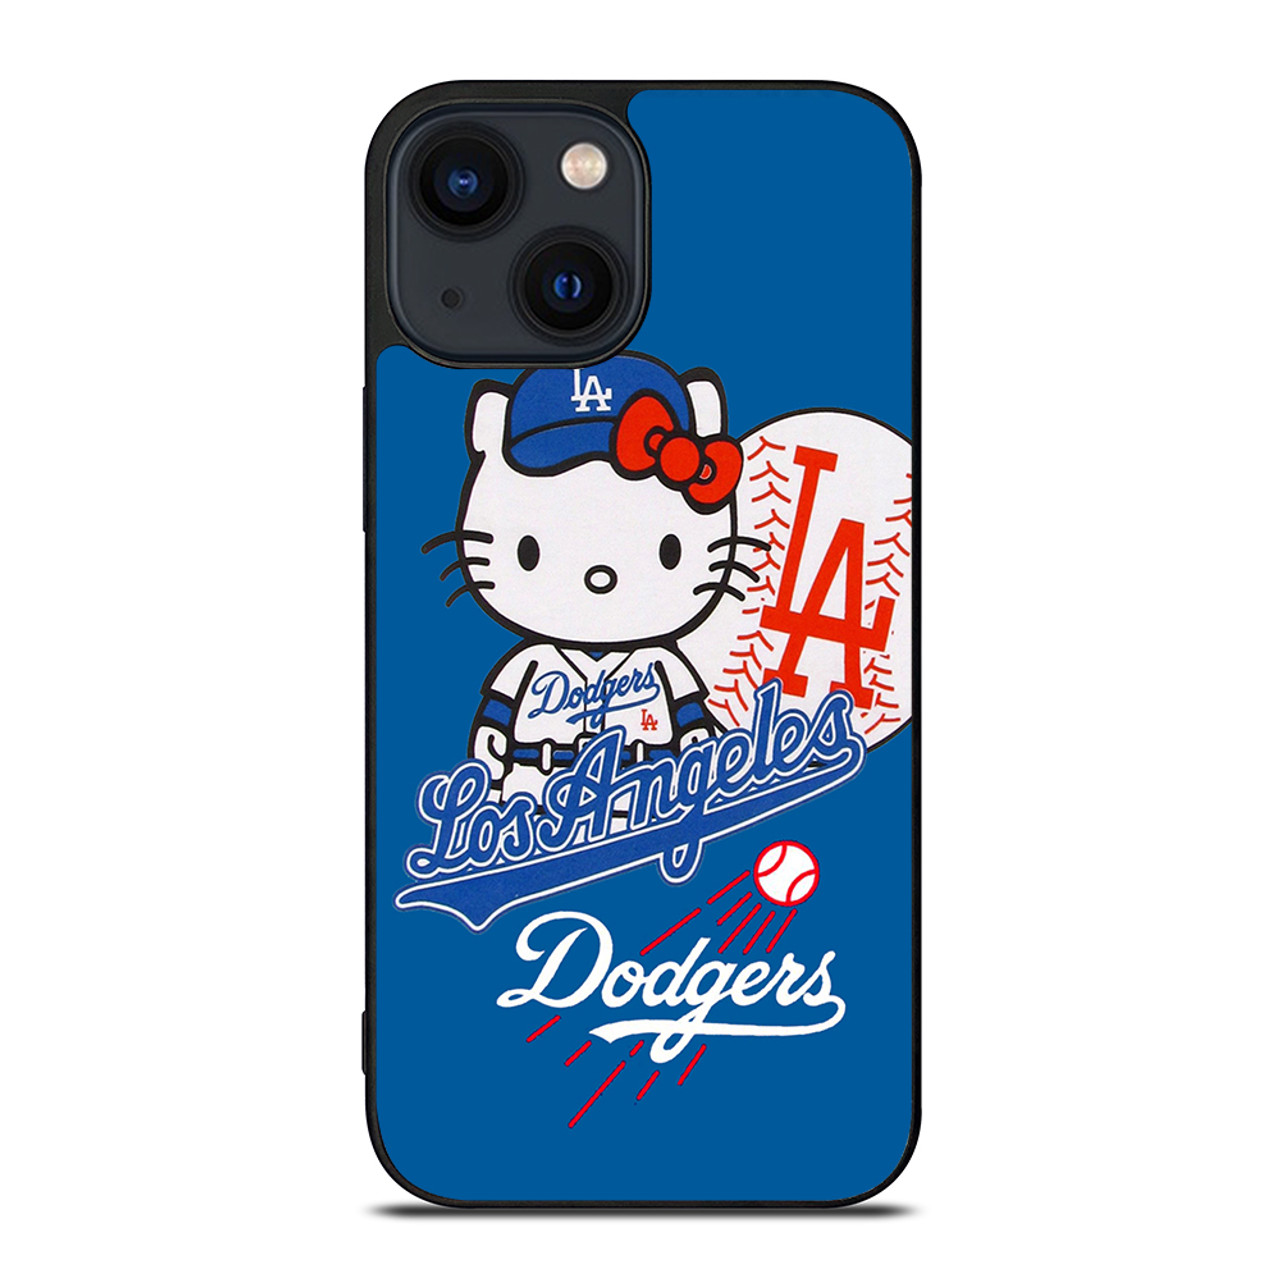 HELLO KITTY LA DODGERS iPhone XR Case Cover